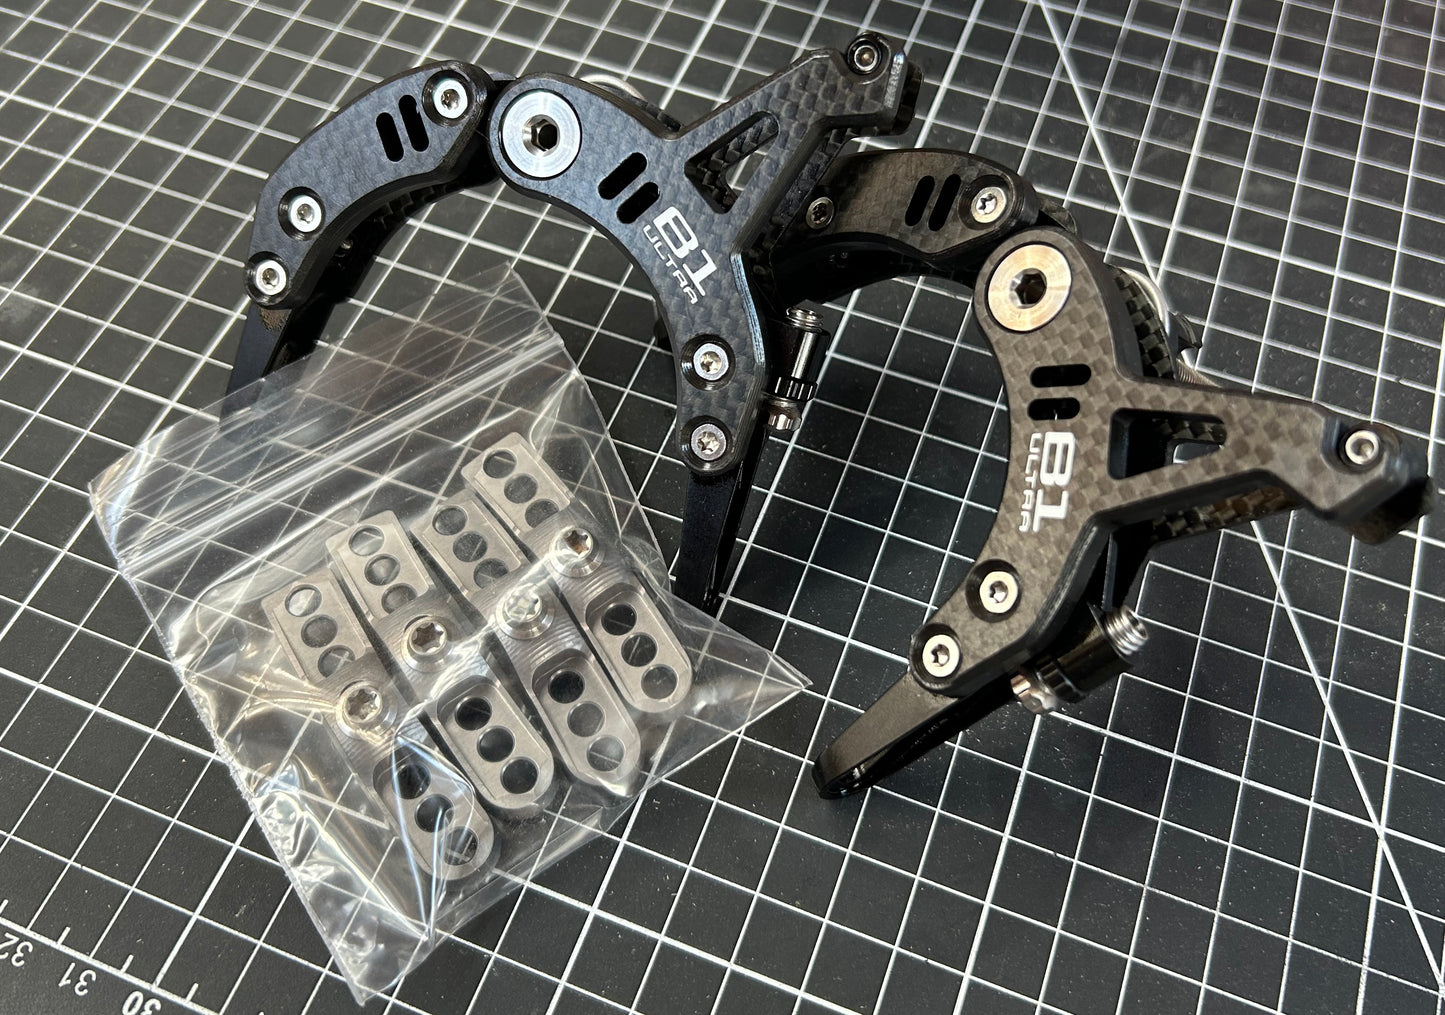 B1 Ultra for Brakes for Brompton